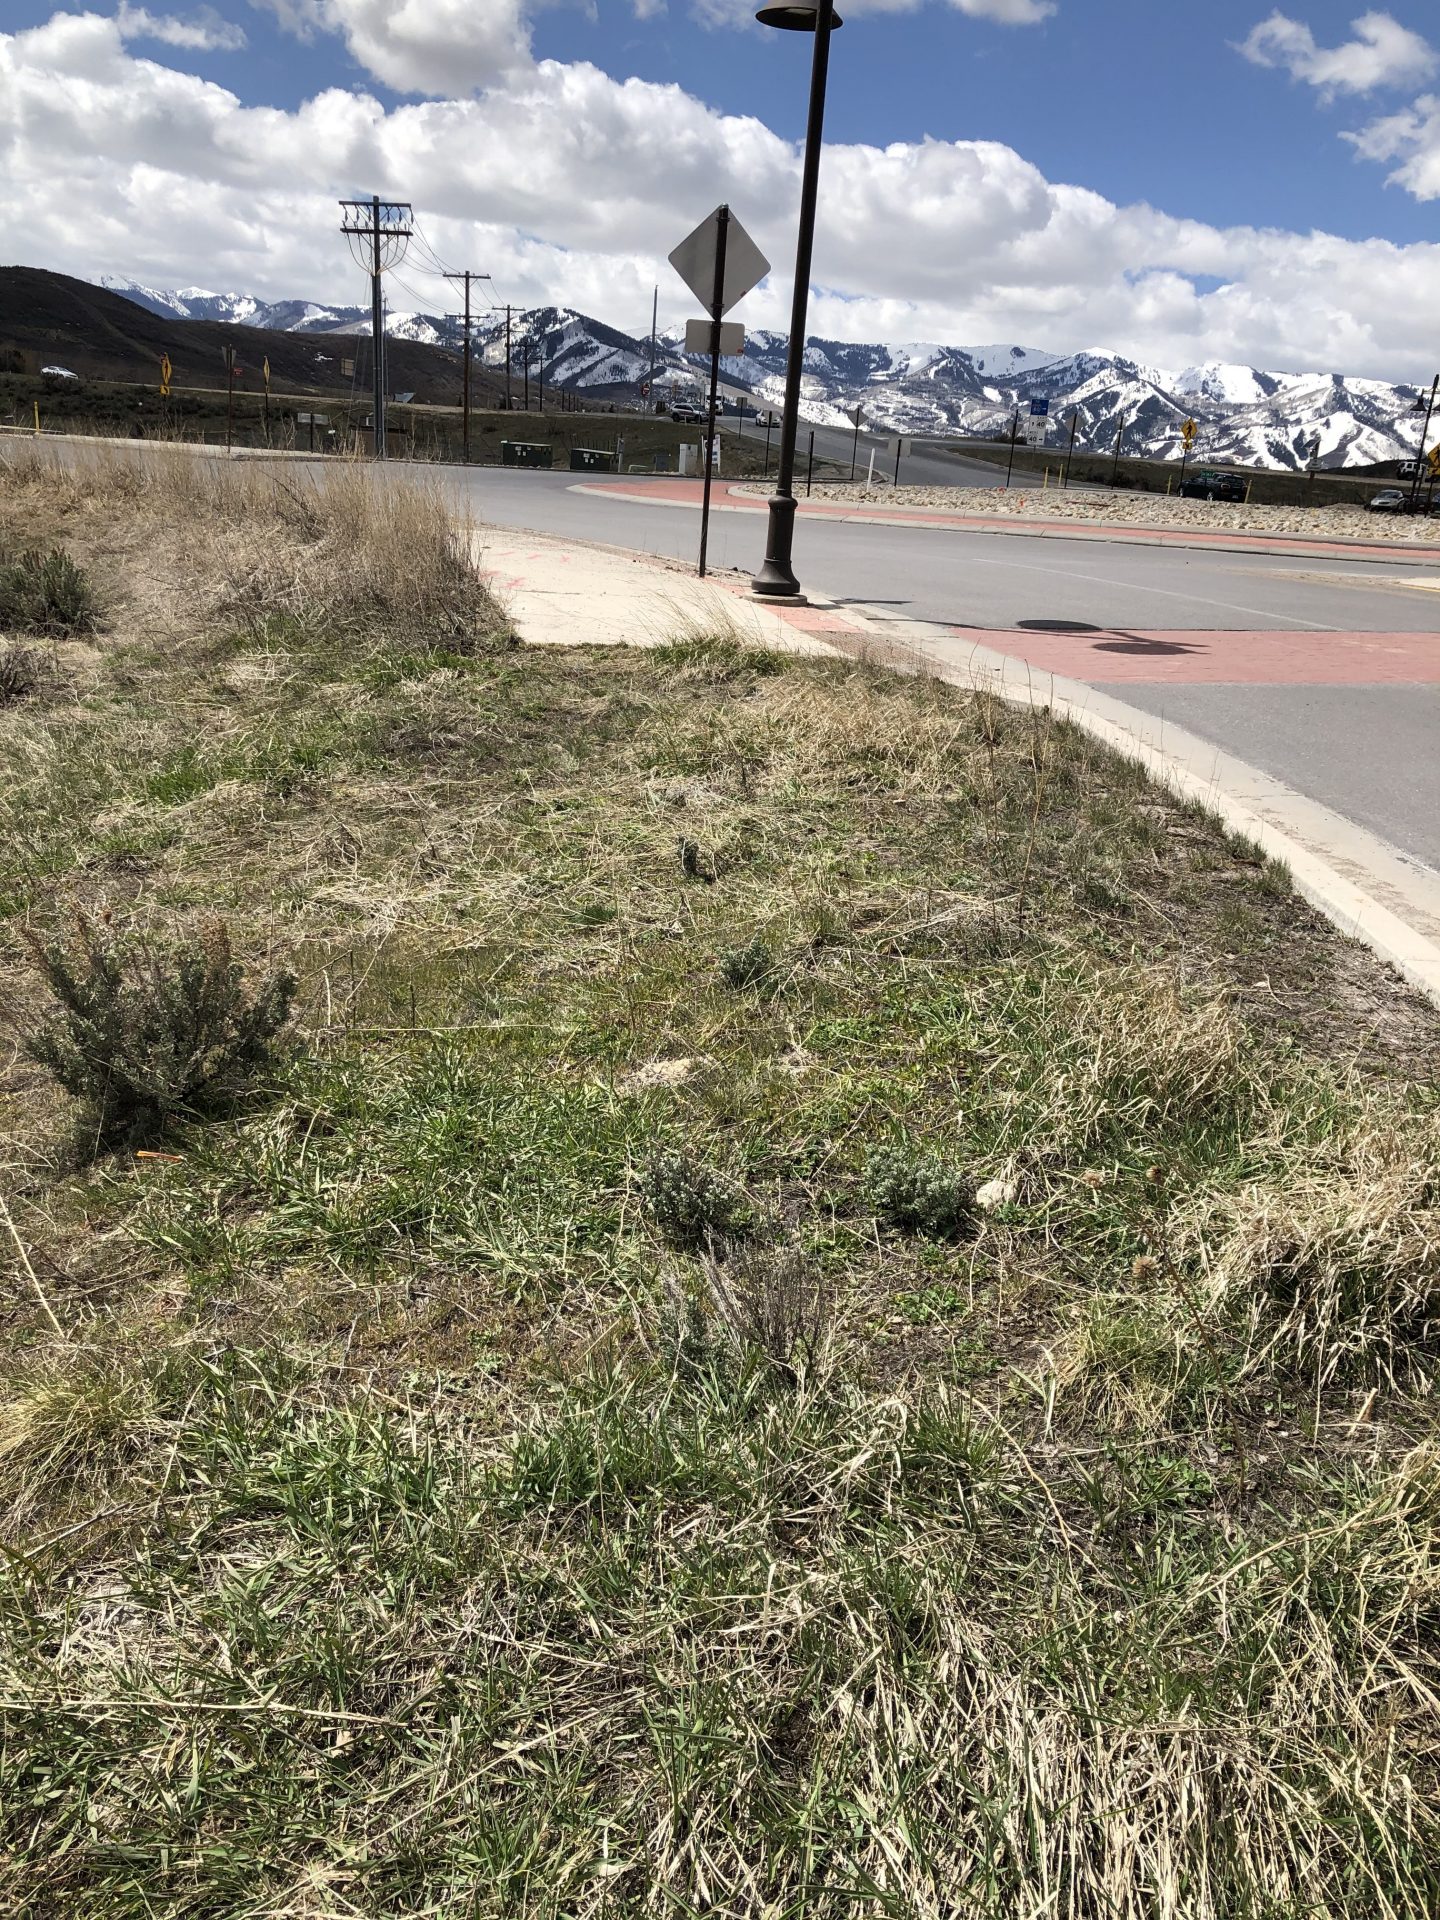 Photo of the grassy side of the road that I cleaned up on Earth Day.